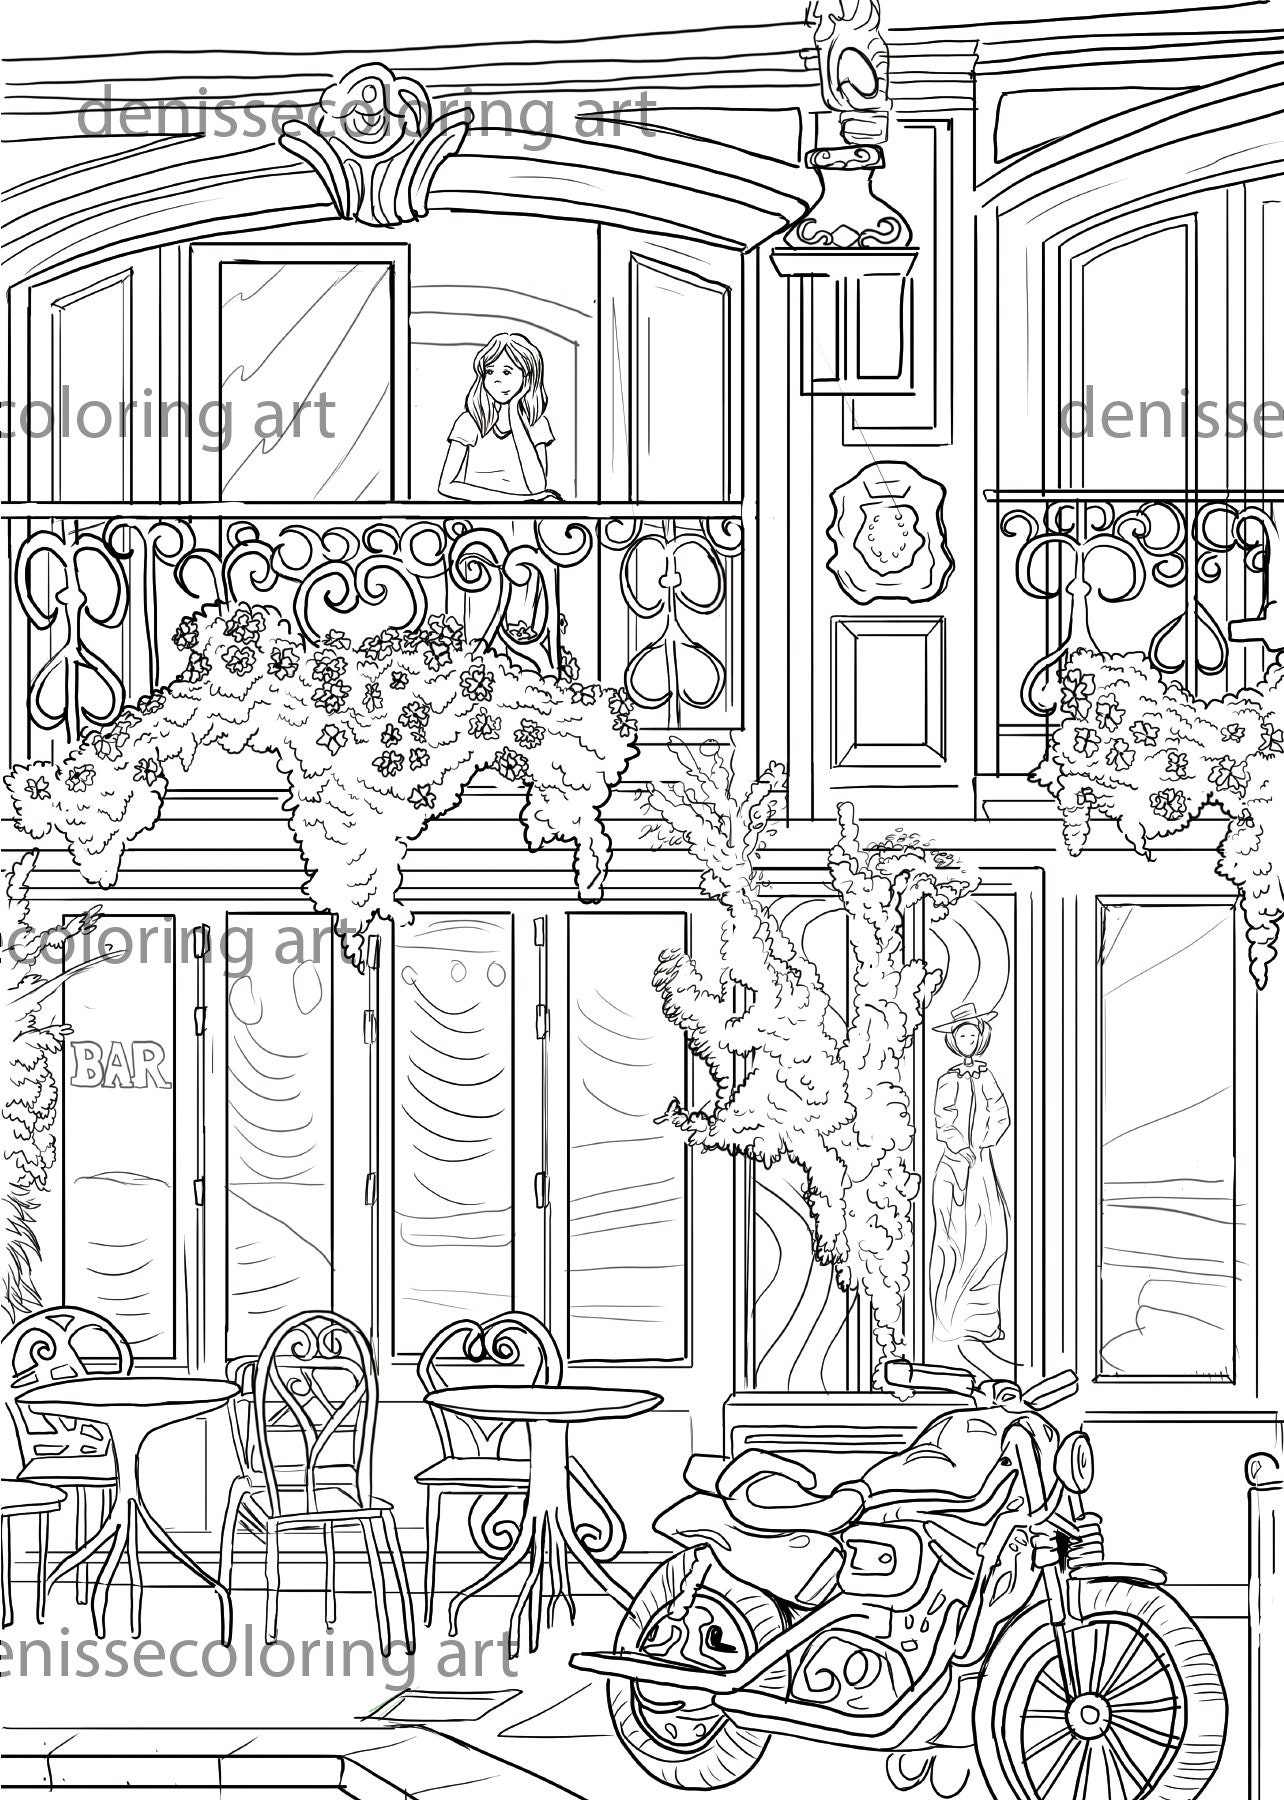 Coloring Page box - free printable coloring pages - Img 18720